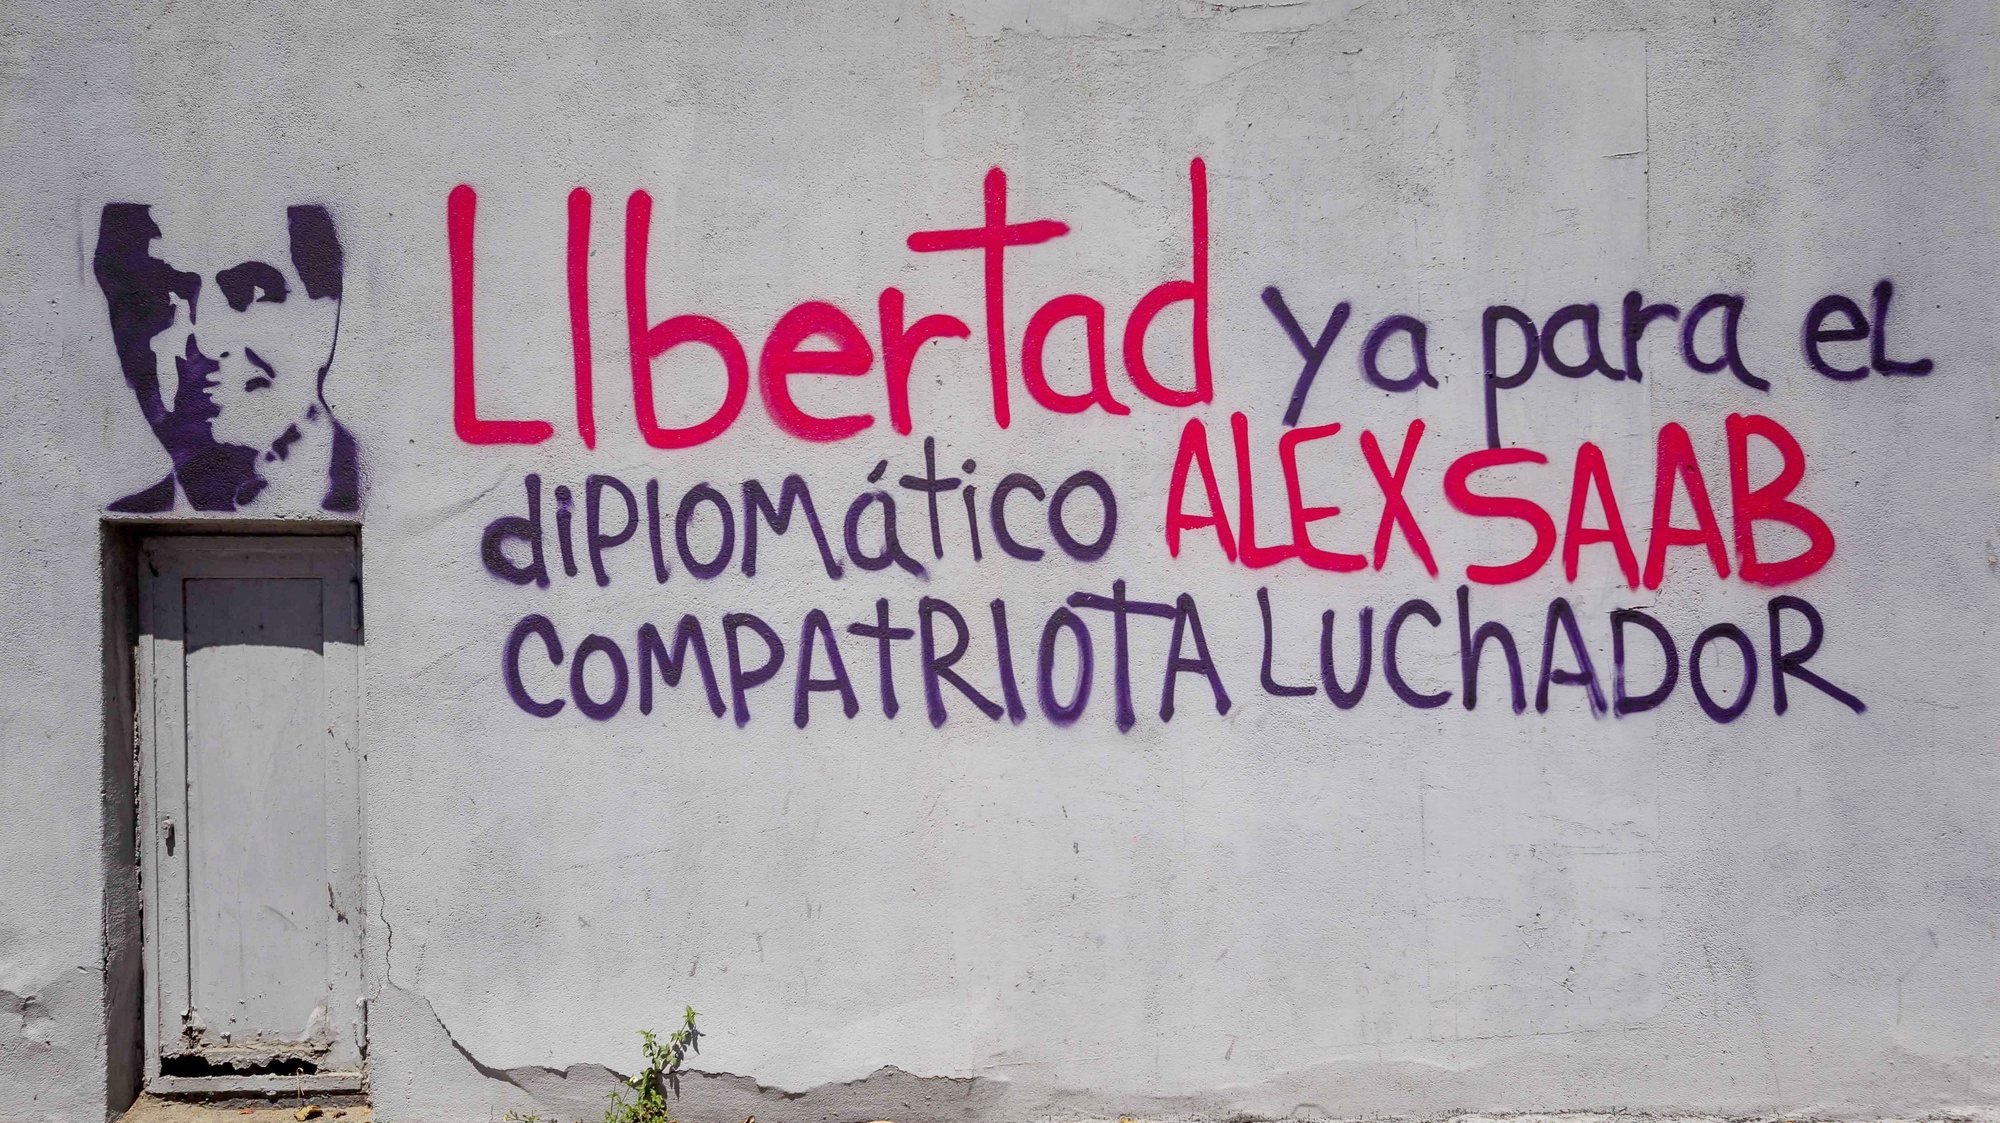 epa09024179 A graffiti oim support of Alex Saab reading &#039;Freedom now for the diplomat Alex Saan compatriot fighter&#039; at wall of the ruling party PDVSA headquarters in Caracas, Venezuela, 19 February 2021. Venezuelan diplomat Alex Saab was arrested in Cape Verde in June 2020 at the request of the USA for alleged financial crimes, he was later placed under house arrest in January 2021.  EPA/Miguel GutiÃ©rrez